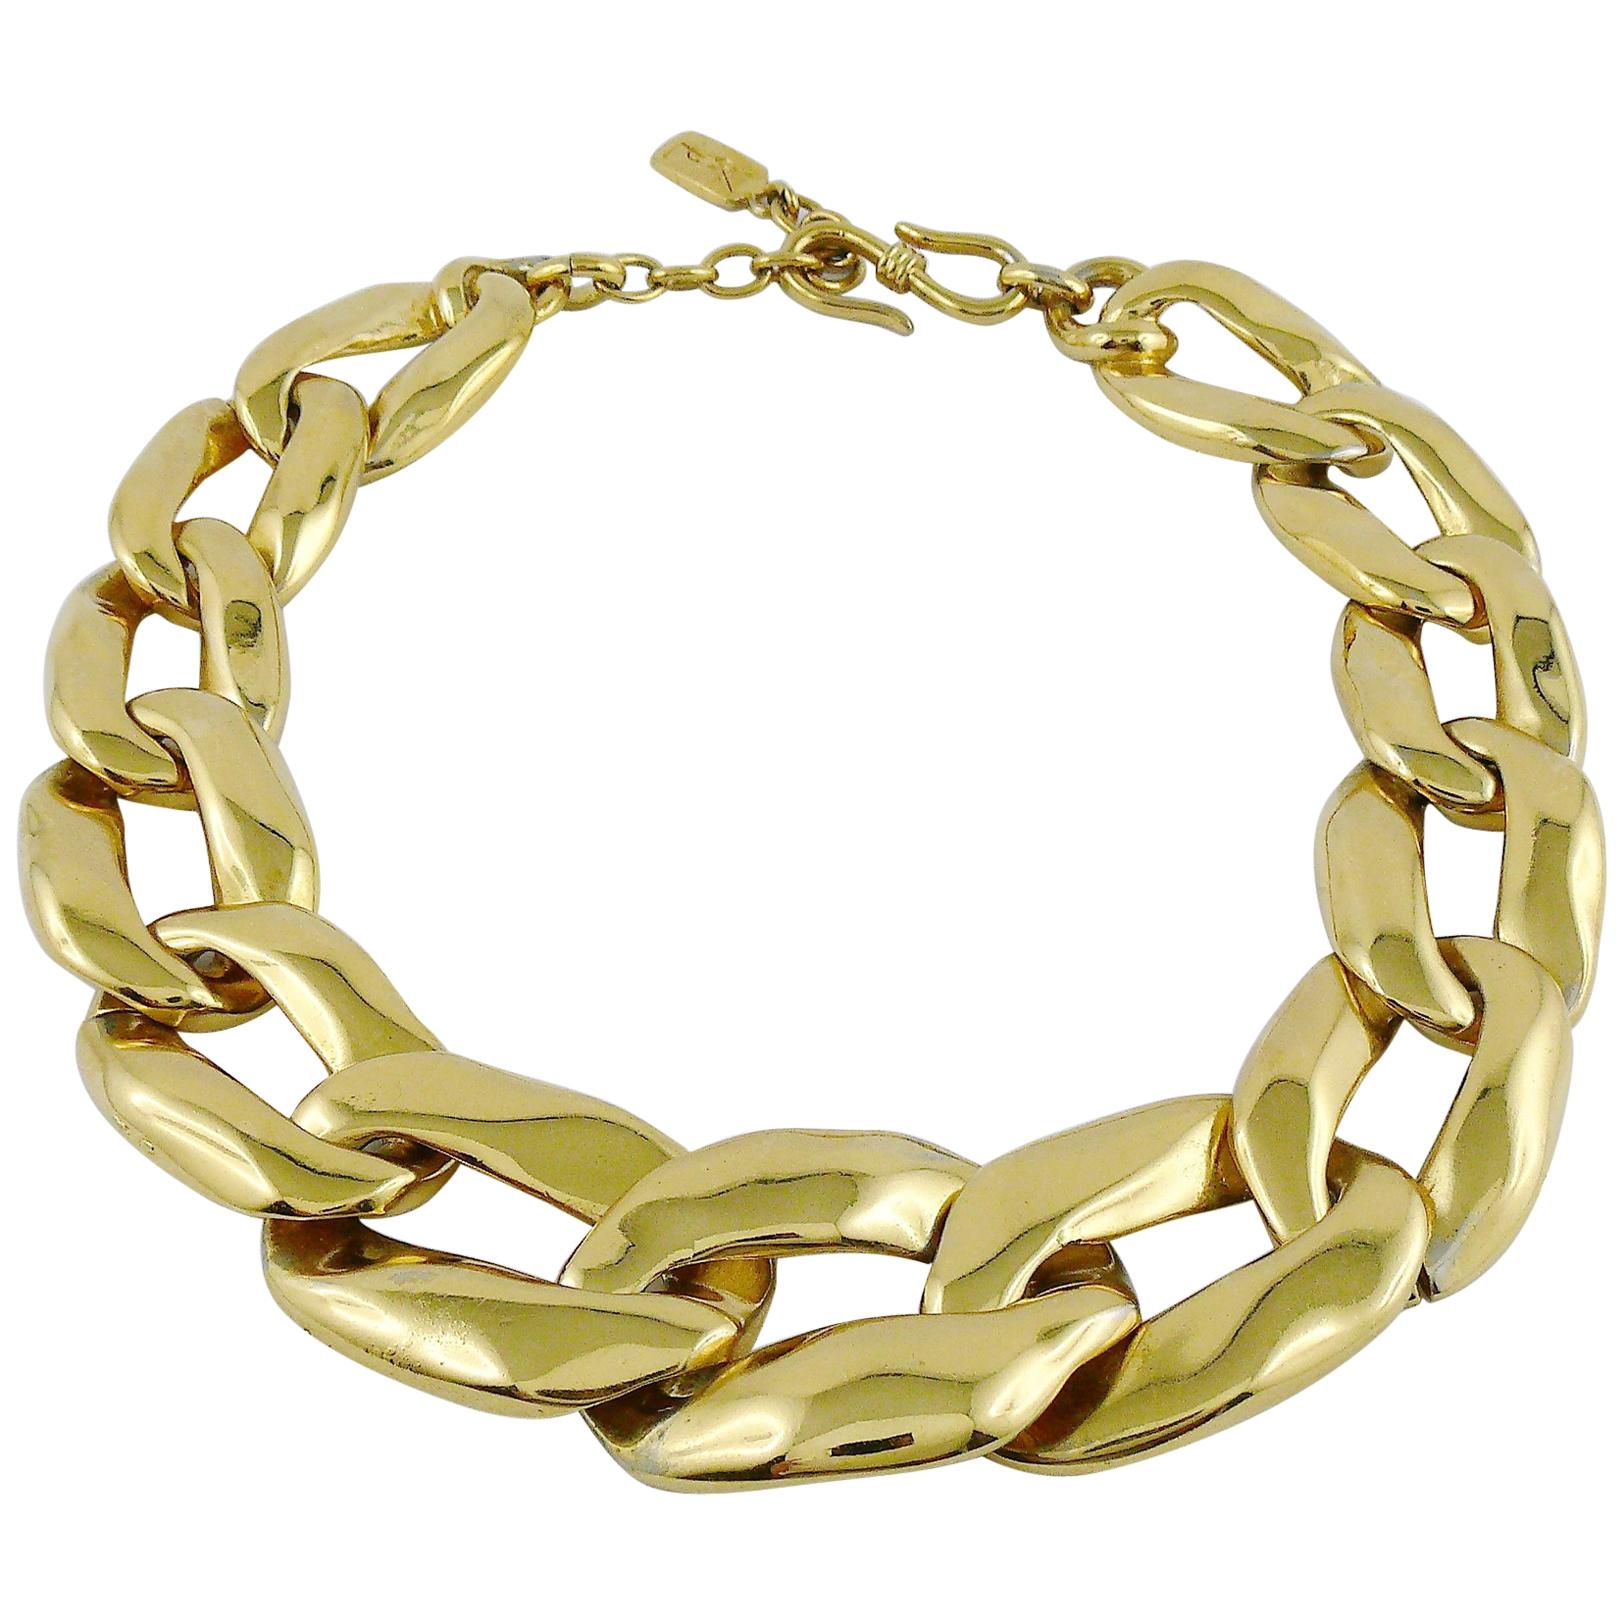 Yves Saint Laurent YSL Vintage Athos Iconic Gold Toned Curb Chain Necklace